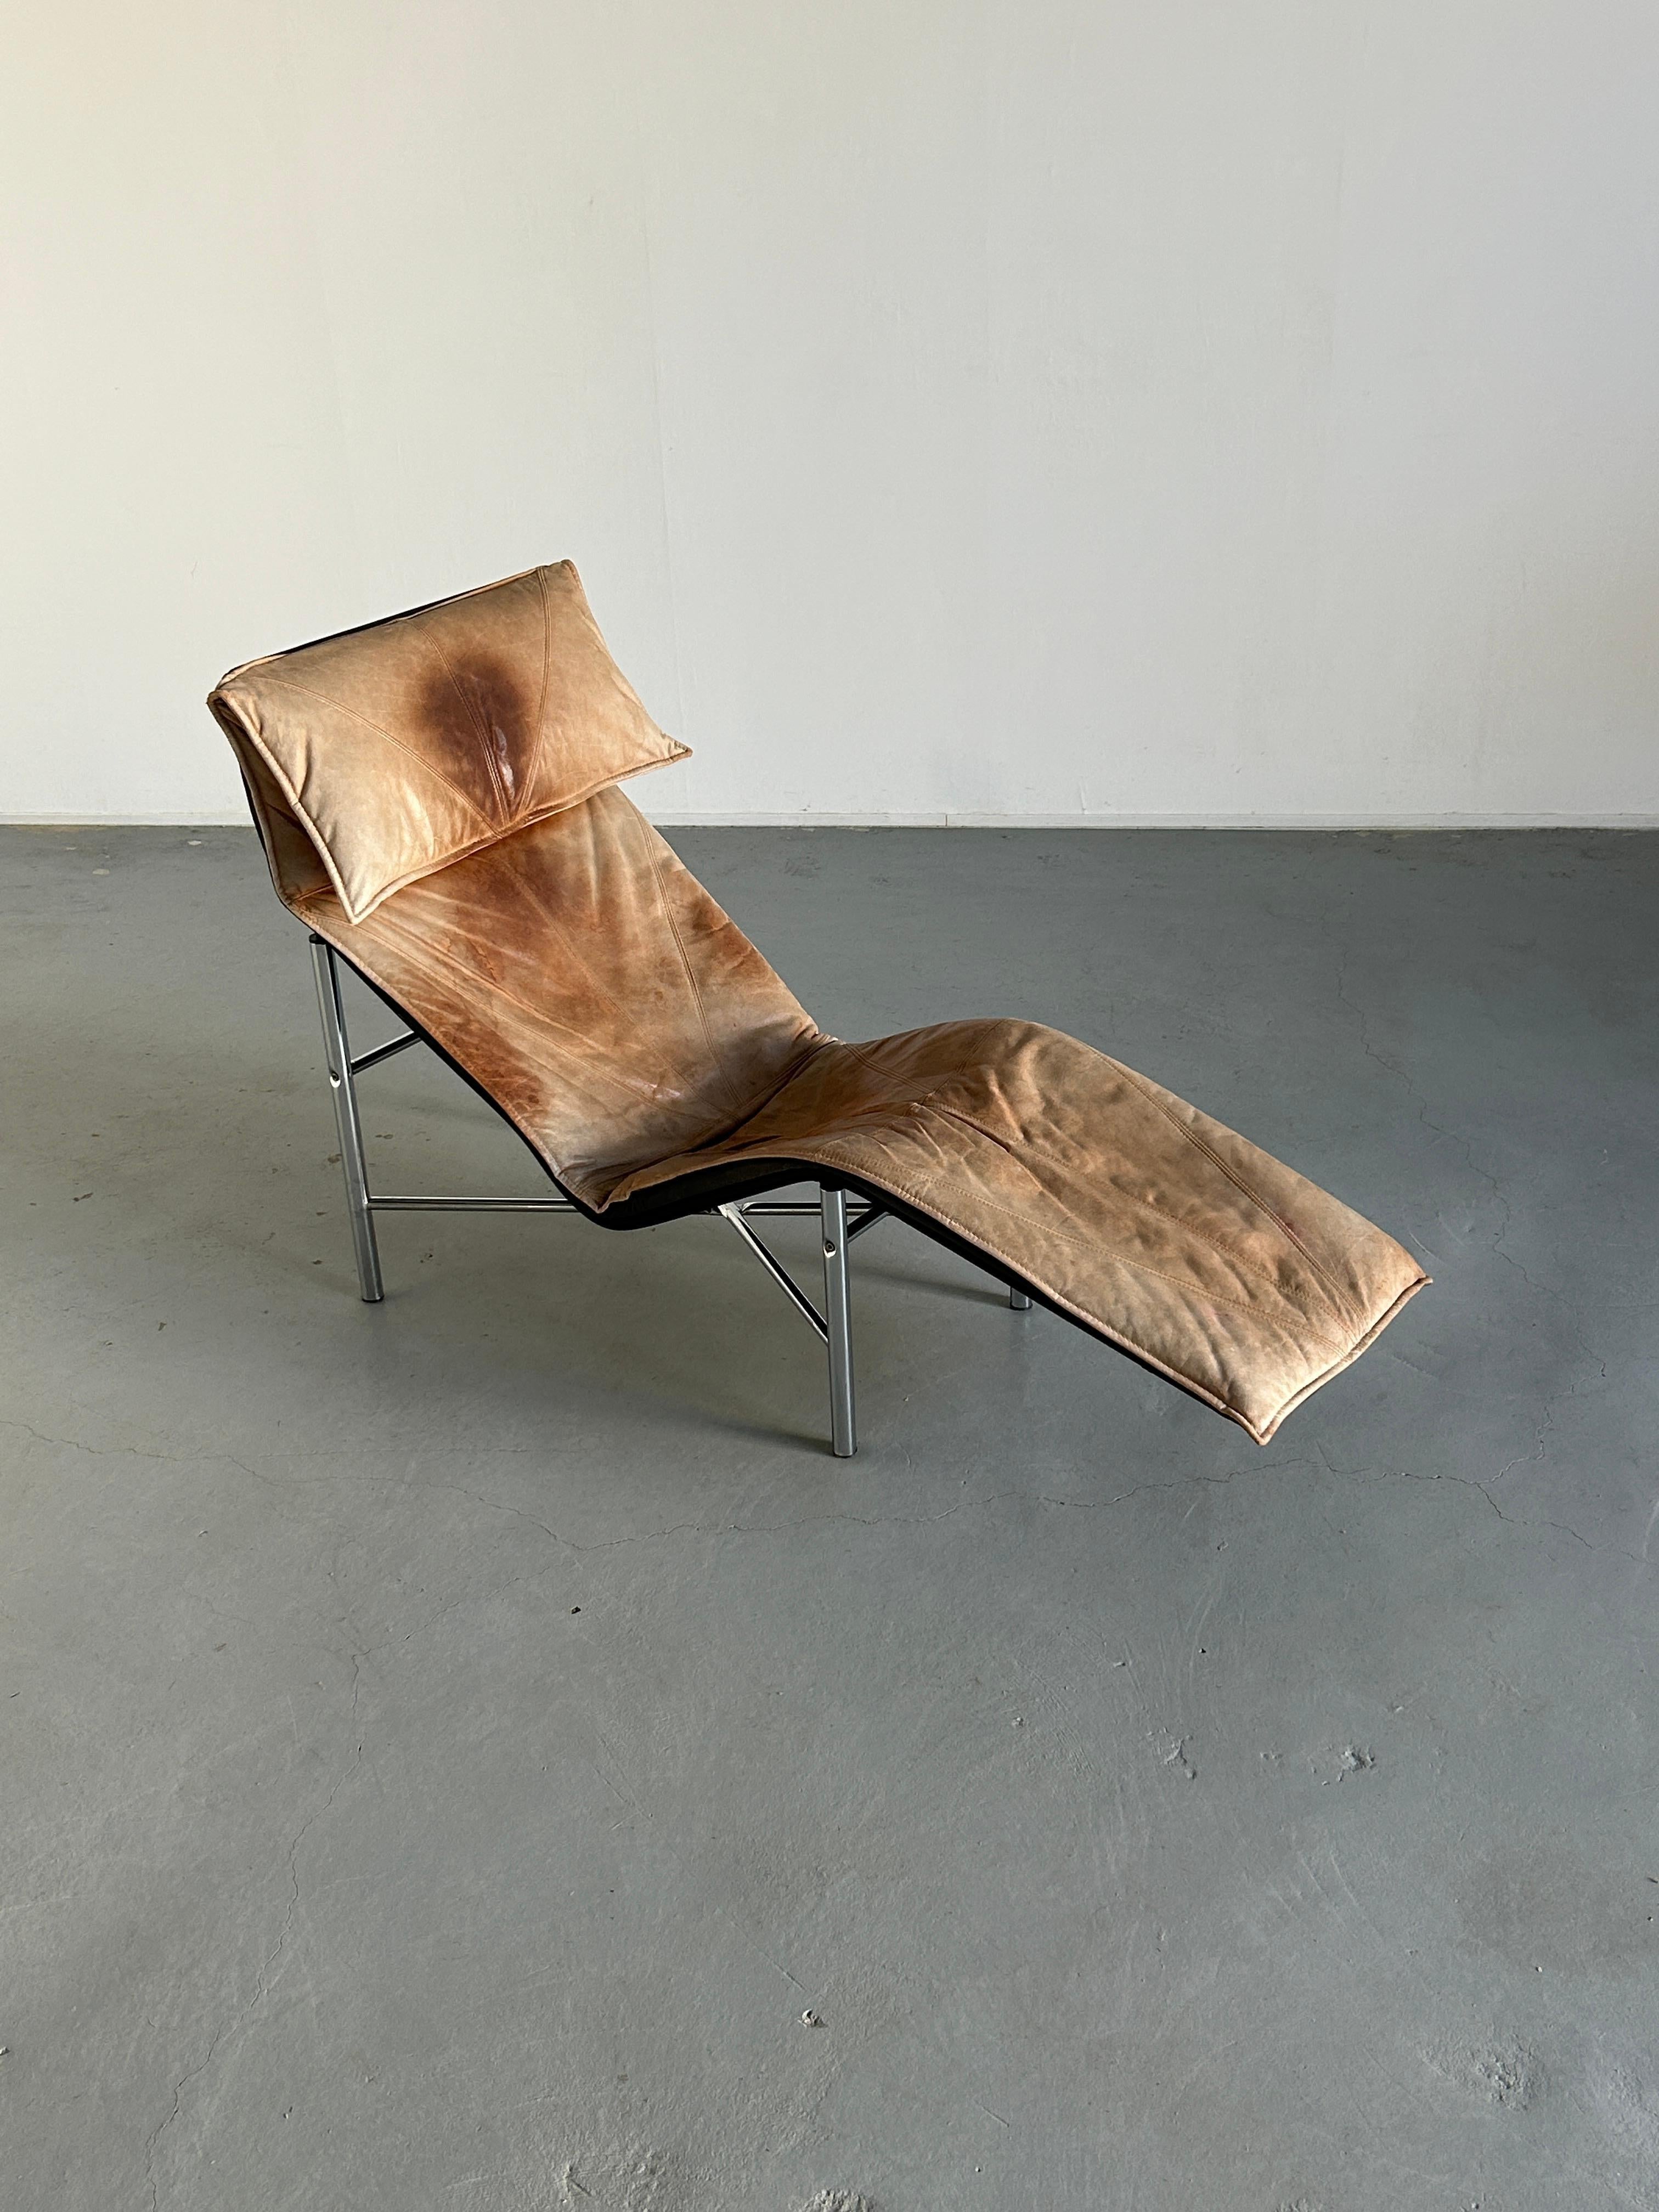 Mid-Century Modern Vintage Leather Chaise Longue in Cognac Leather by Tord Bjorklund for Ikea, 1980